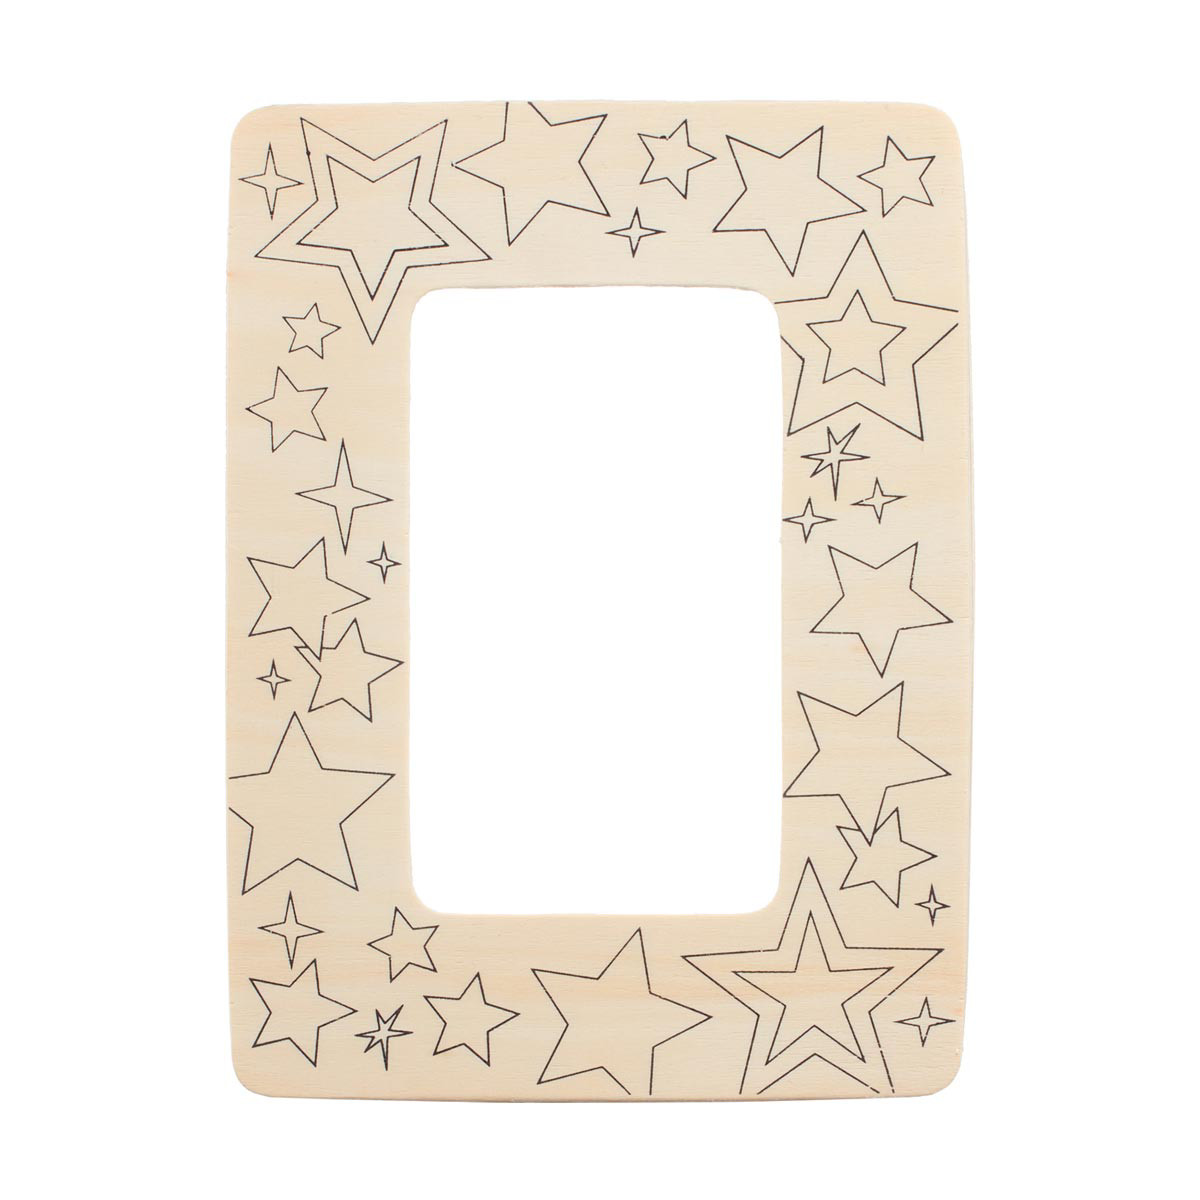 Wood Color-In Frame with Star Design